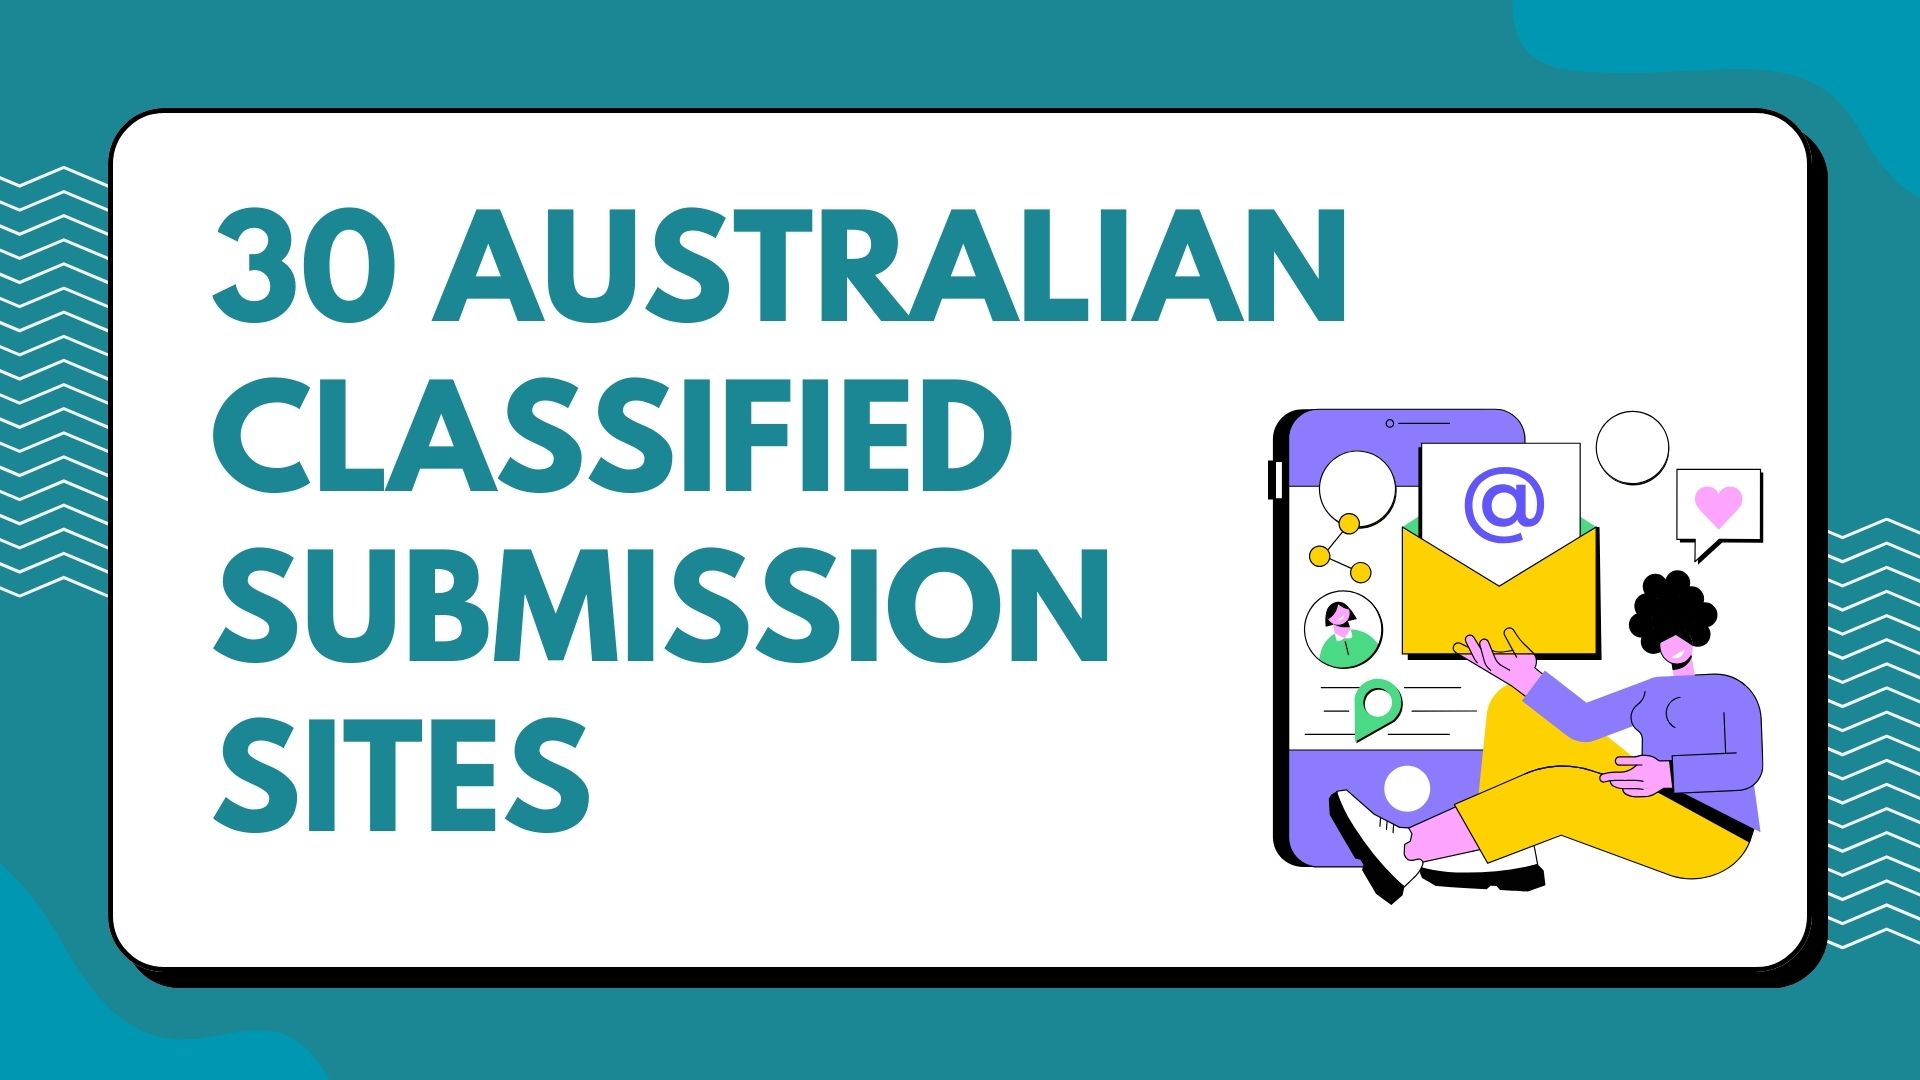 30 Australian Classified Submission Sites